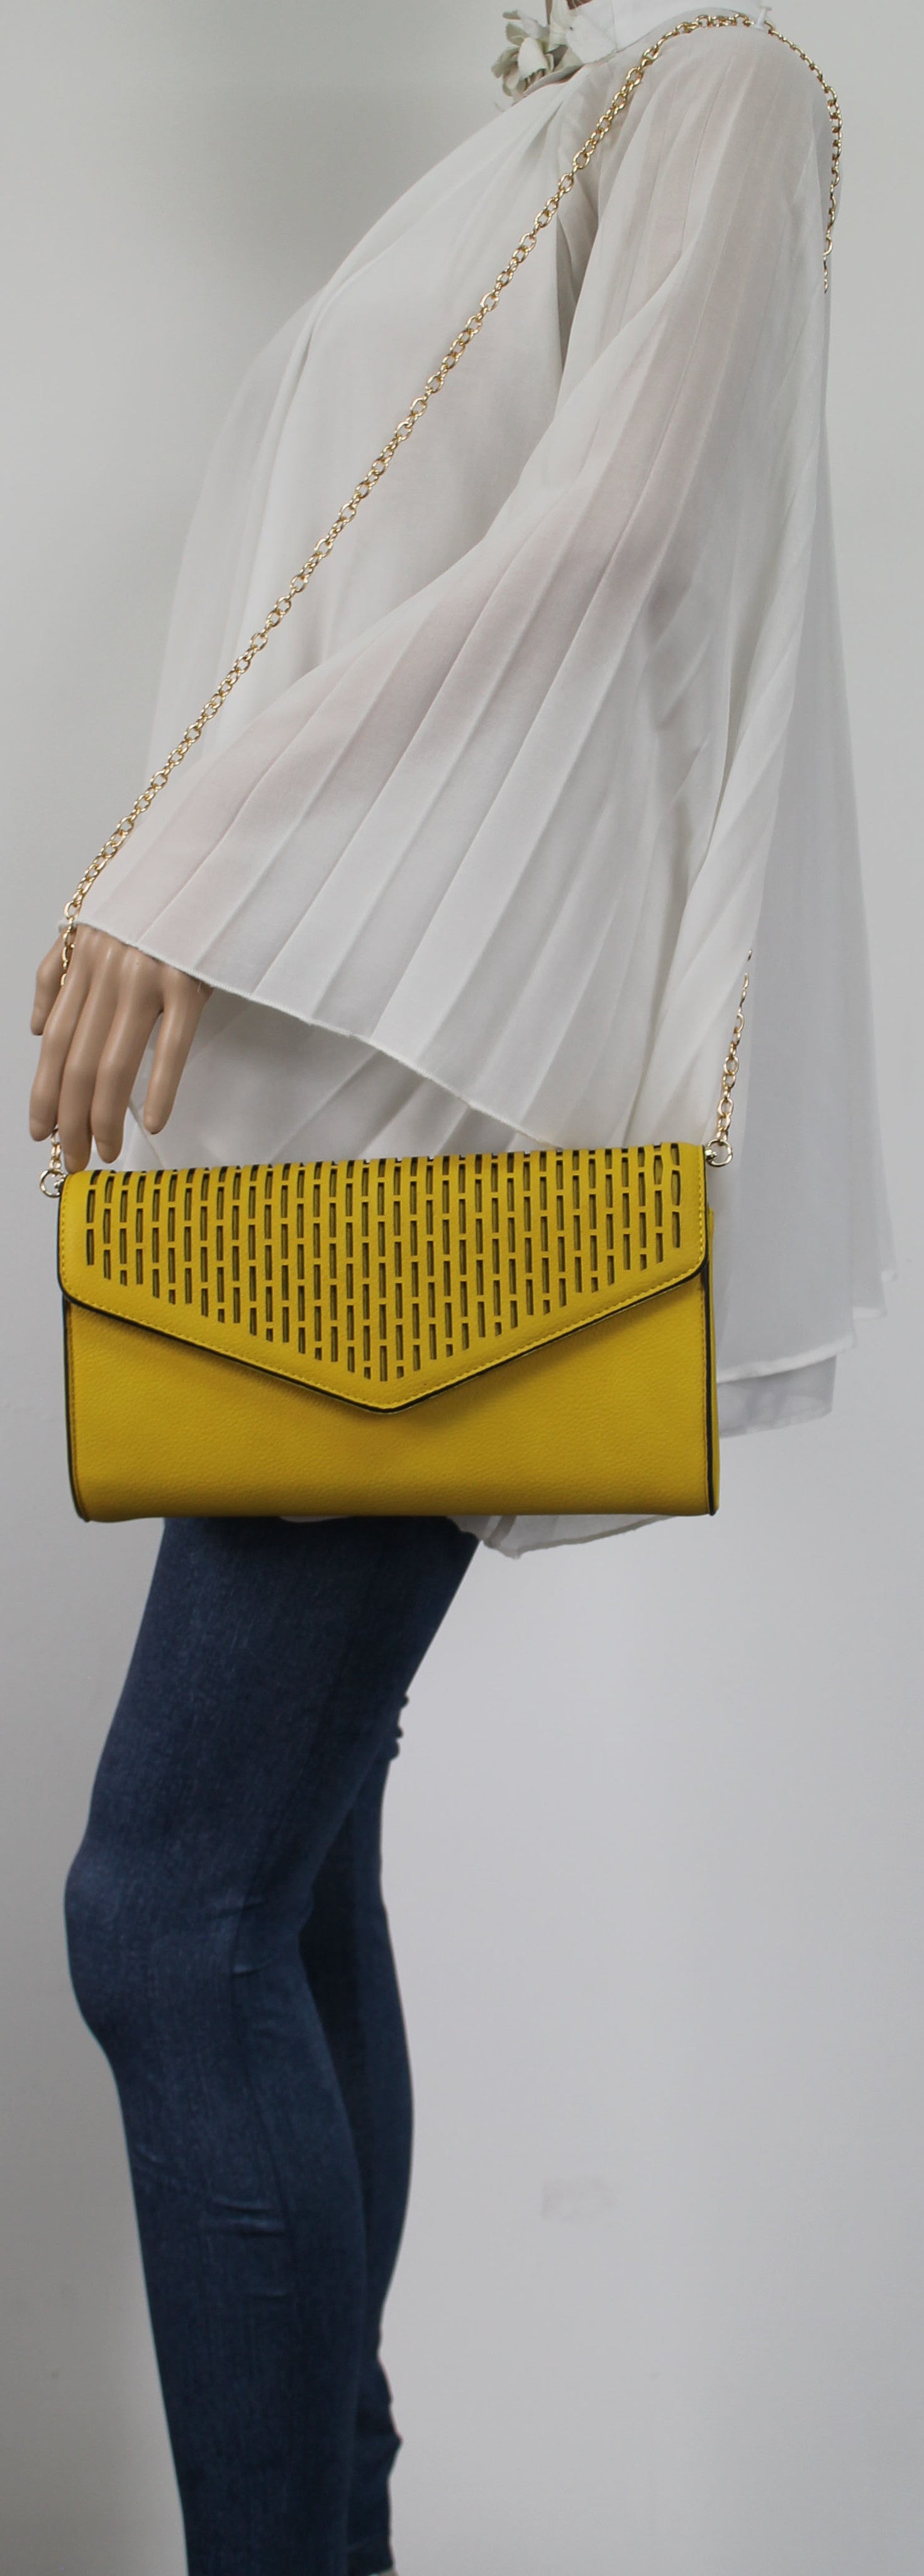 SWANKYSWANS Andrea Clutch Bag Yellow Cute Cheap Clutch Bag For Weddings School and Work